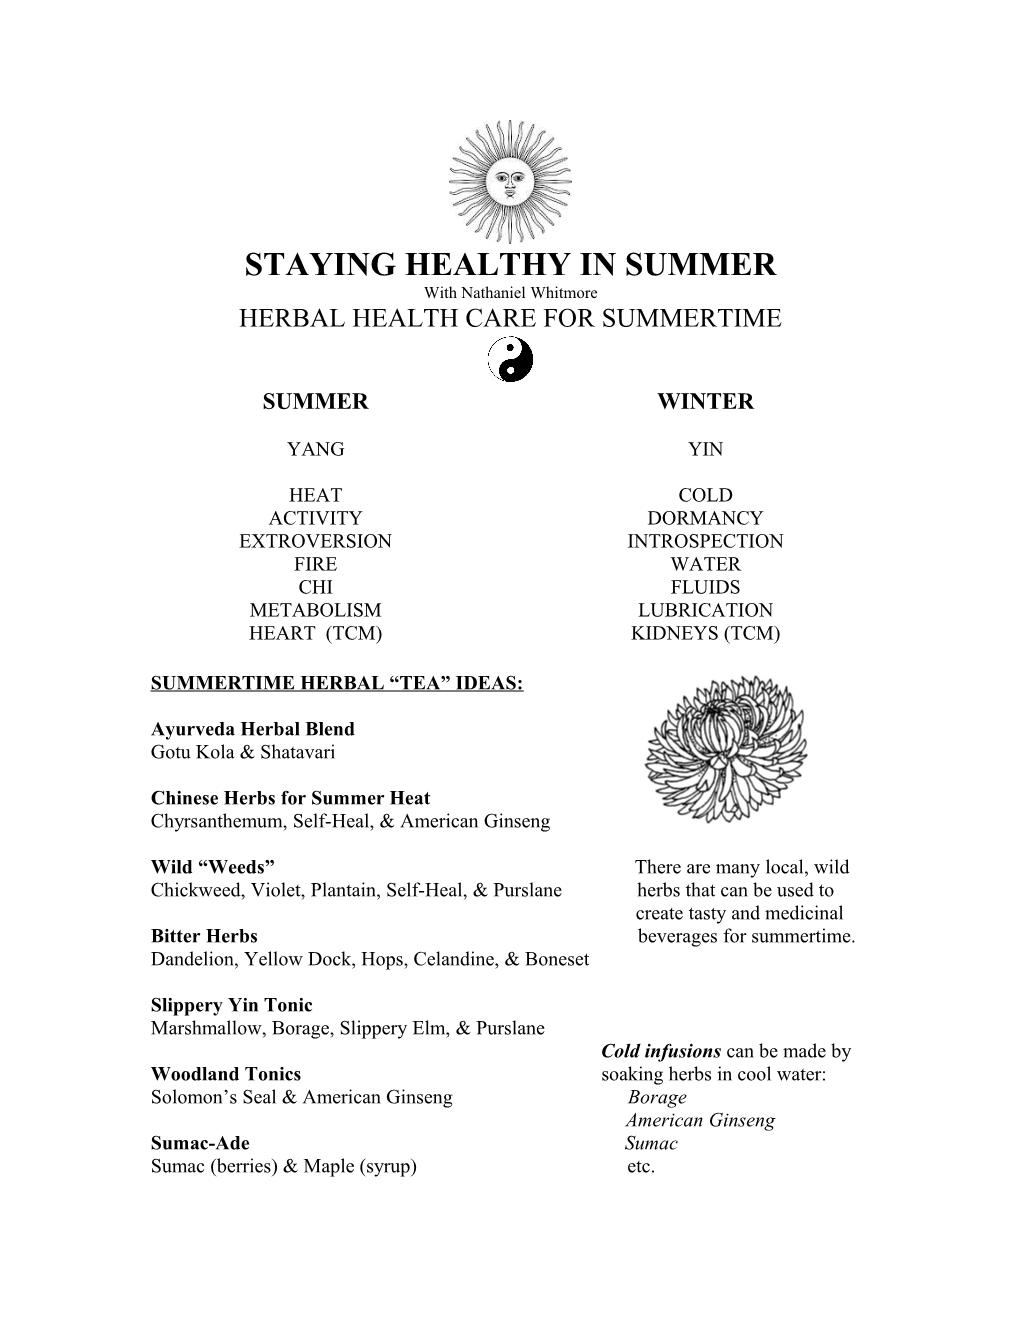 Staying Healthy in Summer